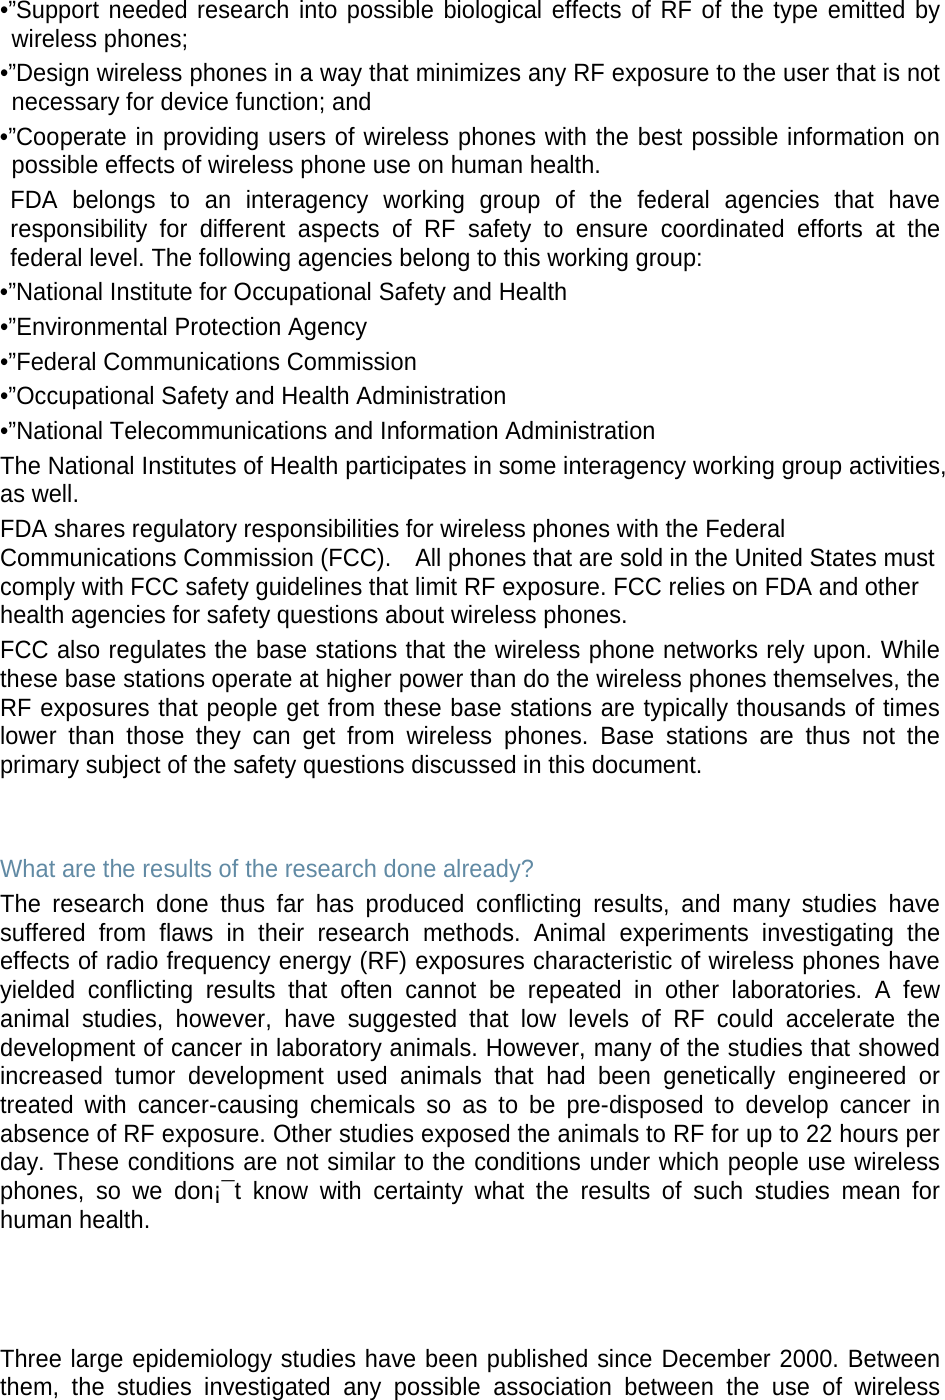 •”Support needed research into possible biological effects of RF of the type emitted by wireless phones; •”Design wireless phones in a way that minimizes any RF exposure to the user that is not necessary for device function; and •”Cooperate in providing users of wireless phones with the best possible information on possible effects of wireless phone use on human health. FDA belongs to an interagency working group of the federal agencies that have responsibility for different aspects of RF safety to ensure coordinated efforts at the federal level. The following agencies belong to this working group: •”National Institute for Occupational Safety and Health •”Environmental Protection Agency •”Federal Communications Commission •”Occupational Safety and Health Administration •”National Telecommunications and Information Administration The National Institutes of Health participates in some interagency working group activities, as well. FDA shares regulatory responsibilities for wireless phones with the Federal Communications Commission (FCC).    All phones that are sold in the United States must comply with FCC safety guidelines that limit RF exposure. FCC relies on FDA and other health agencies for safety questions about wireless phones. FCC also regulates the base stations that the wireless phone networks rely upon. While these base stations operate at higher power than do the wireless phones themselves, the RF exposures that people get from these base stations are typically thousands of times lower than those they can get from wireless phones. Base stations are thus not the primary subject of the safety questions discussed in this document.   What are the results of the research done already? The research done thus far has produced conflicting results, and many studies have suffered from flaws in their research methods. Animal experiments investigating the effects of radio frequency energy (RF) exposures characteristic of wireless phones have yielded conflicting results that often cannot be repeated in other laboratories. A few animal studies, however, have suggested that low levels of RF could accelerate the development of cancer in laboratory animals. However, many of the studies that showed increased tumor development used animals that had been genetically engineered or treated with cancer-causing chemicals so as to be pre-disposed to develop cancer in absence of RF exposure. Other studies exposed the animals to RF for up to 22 hours per day. These conditions are not similar to the conditions under which people use wireless phones, so we don¡¯t know with certainty what the results of such studies mean for human health.    Three large epidemiology studies have been published since December 2000. Between them, the studies investigated any possible association between the use of wireless 